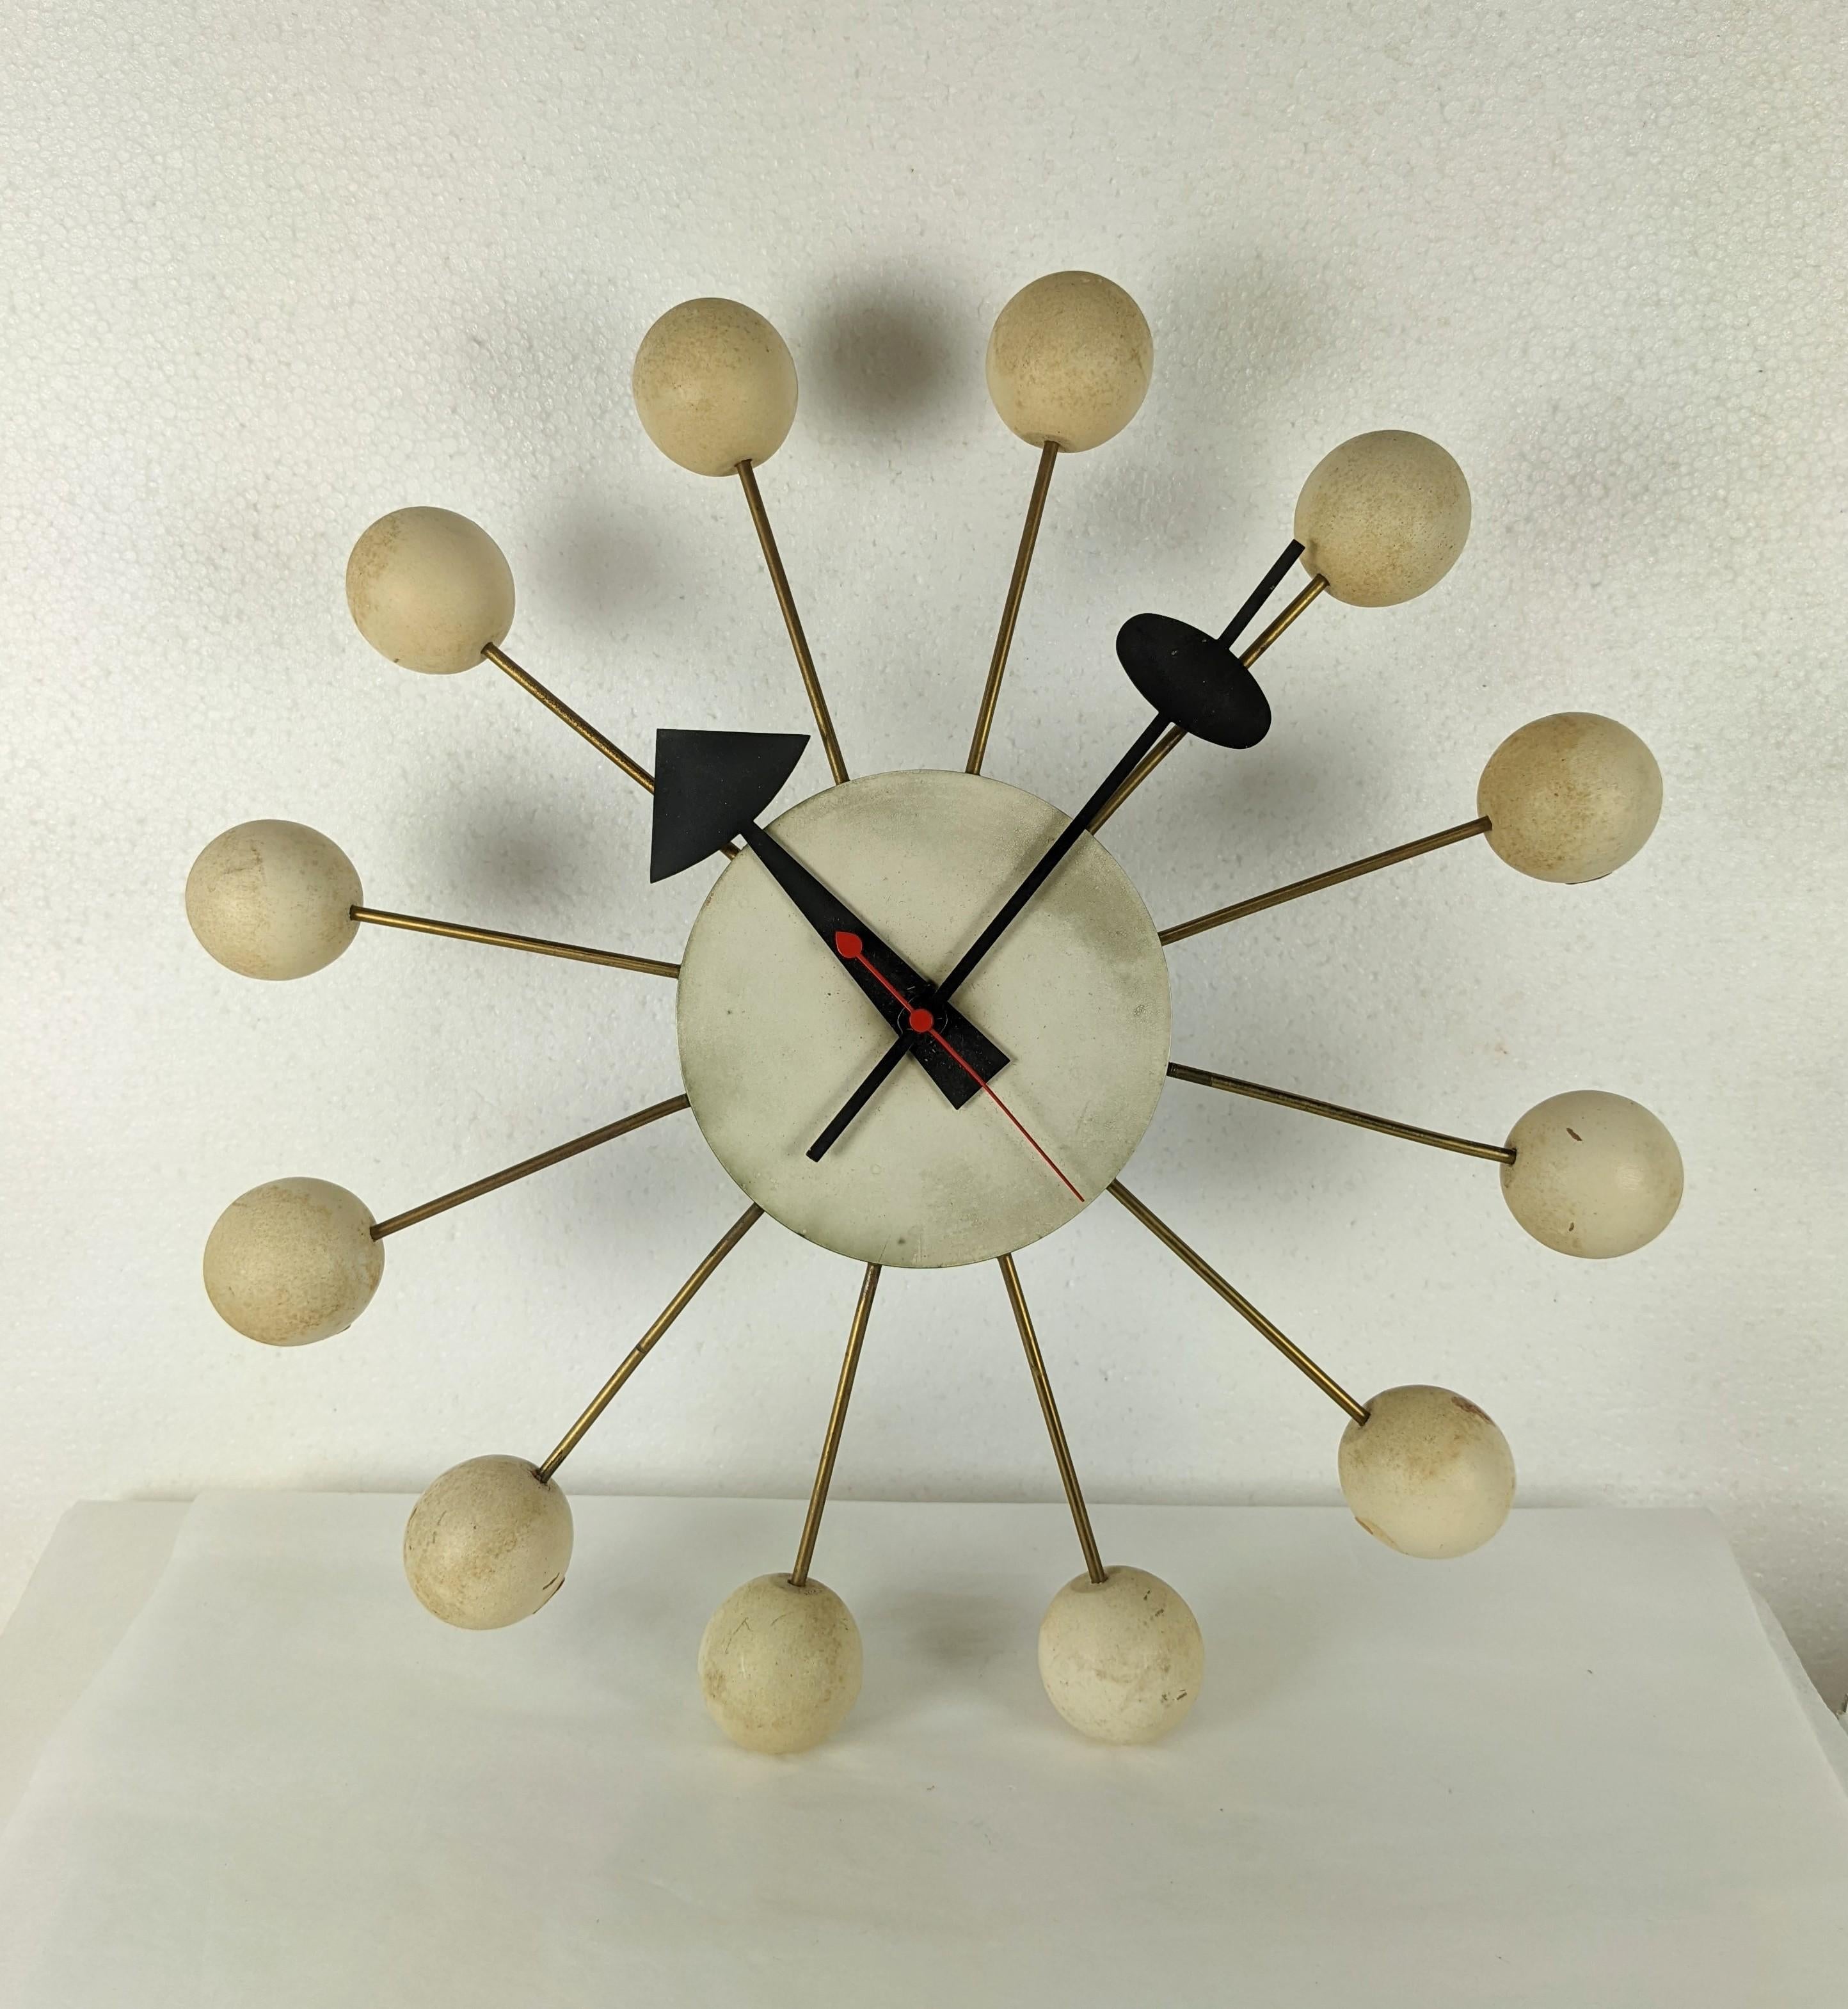 Iconic and classic Howard Miller ball clock from the 1950's by George Nelson. Wonderful Atomic style with a central clock motif with 50's style arms. Twelve brass spokes have painted cream wood balls with matching black hour and minute hands